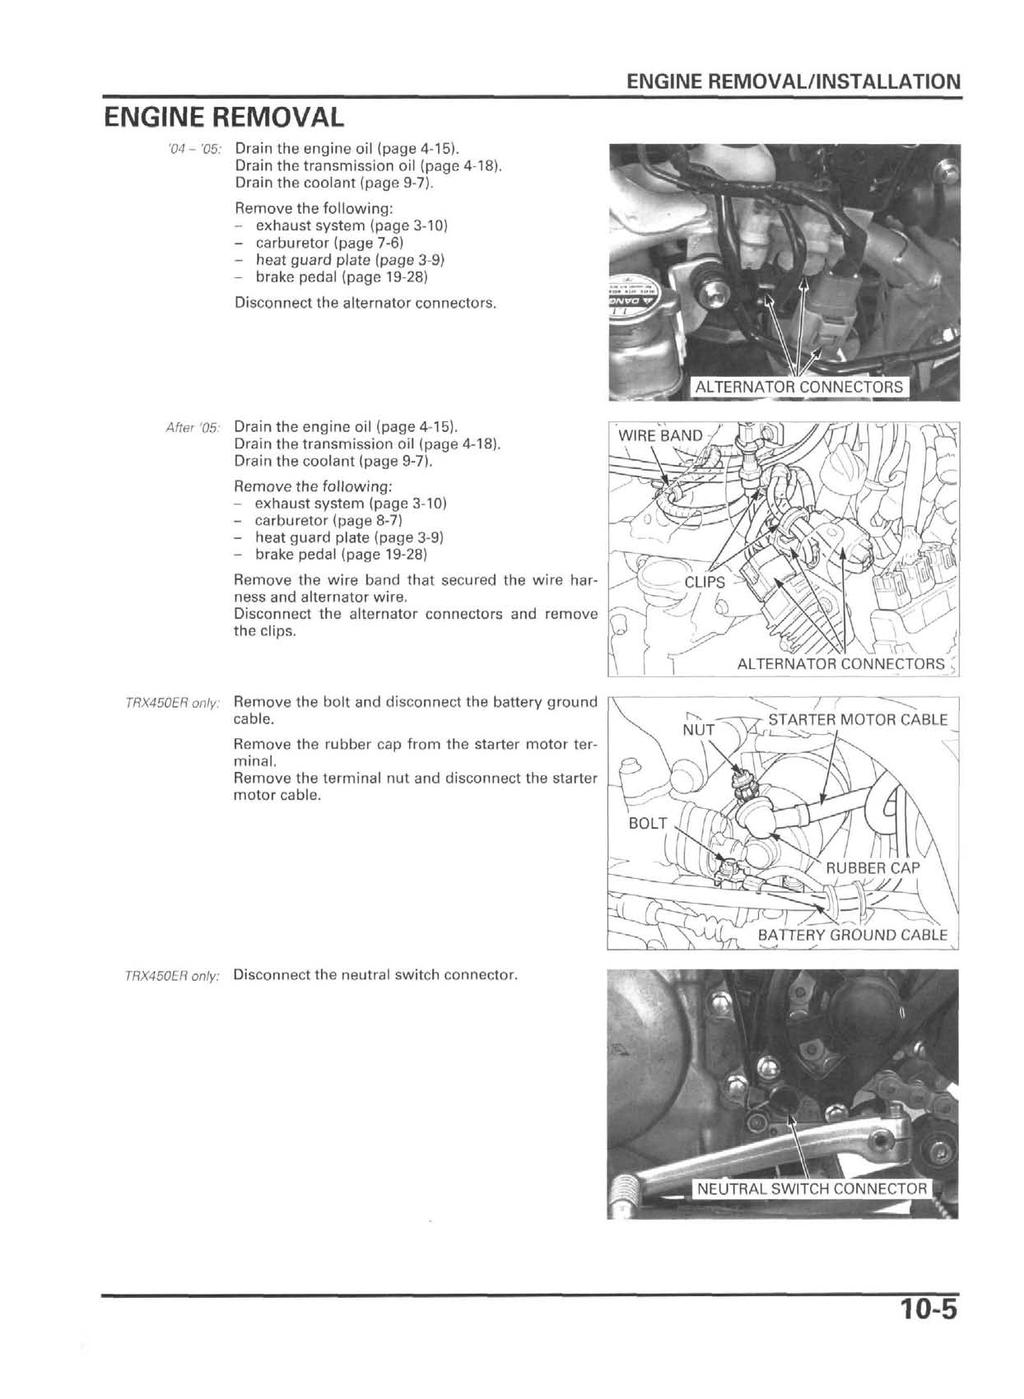 ENGINE REMOVAL '04- '05: Drain the engine oil (page 4-15). Drain the transmission oil (page 4-18). Drain the coolant (page 9-7).